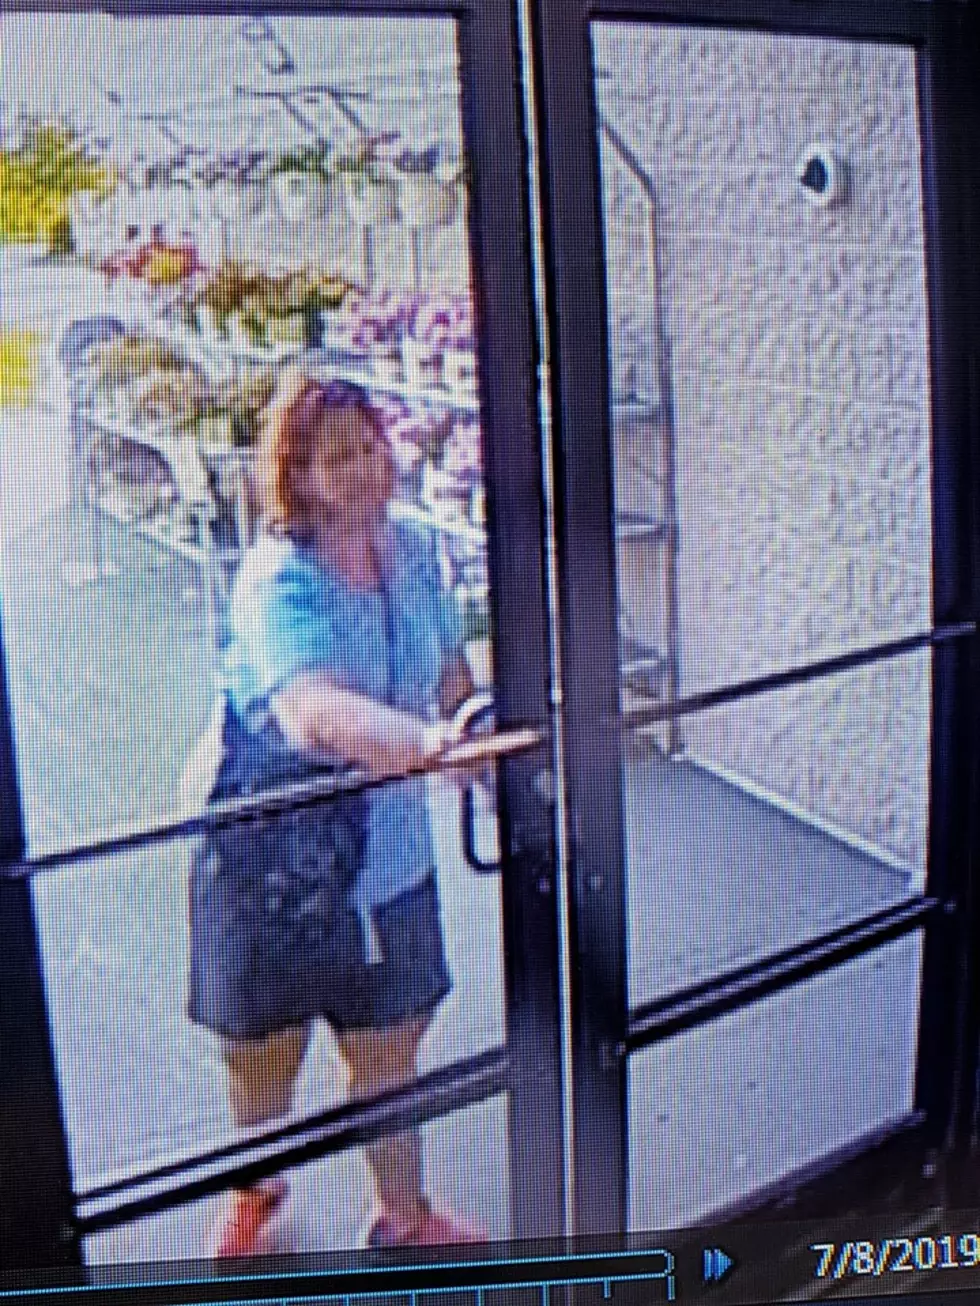 Houlton PD Looking to Identify Woman After Incident at Walmart